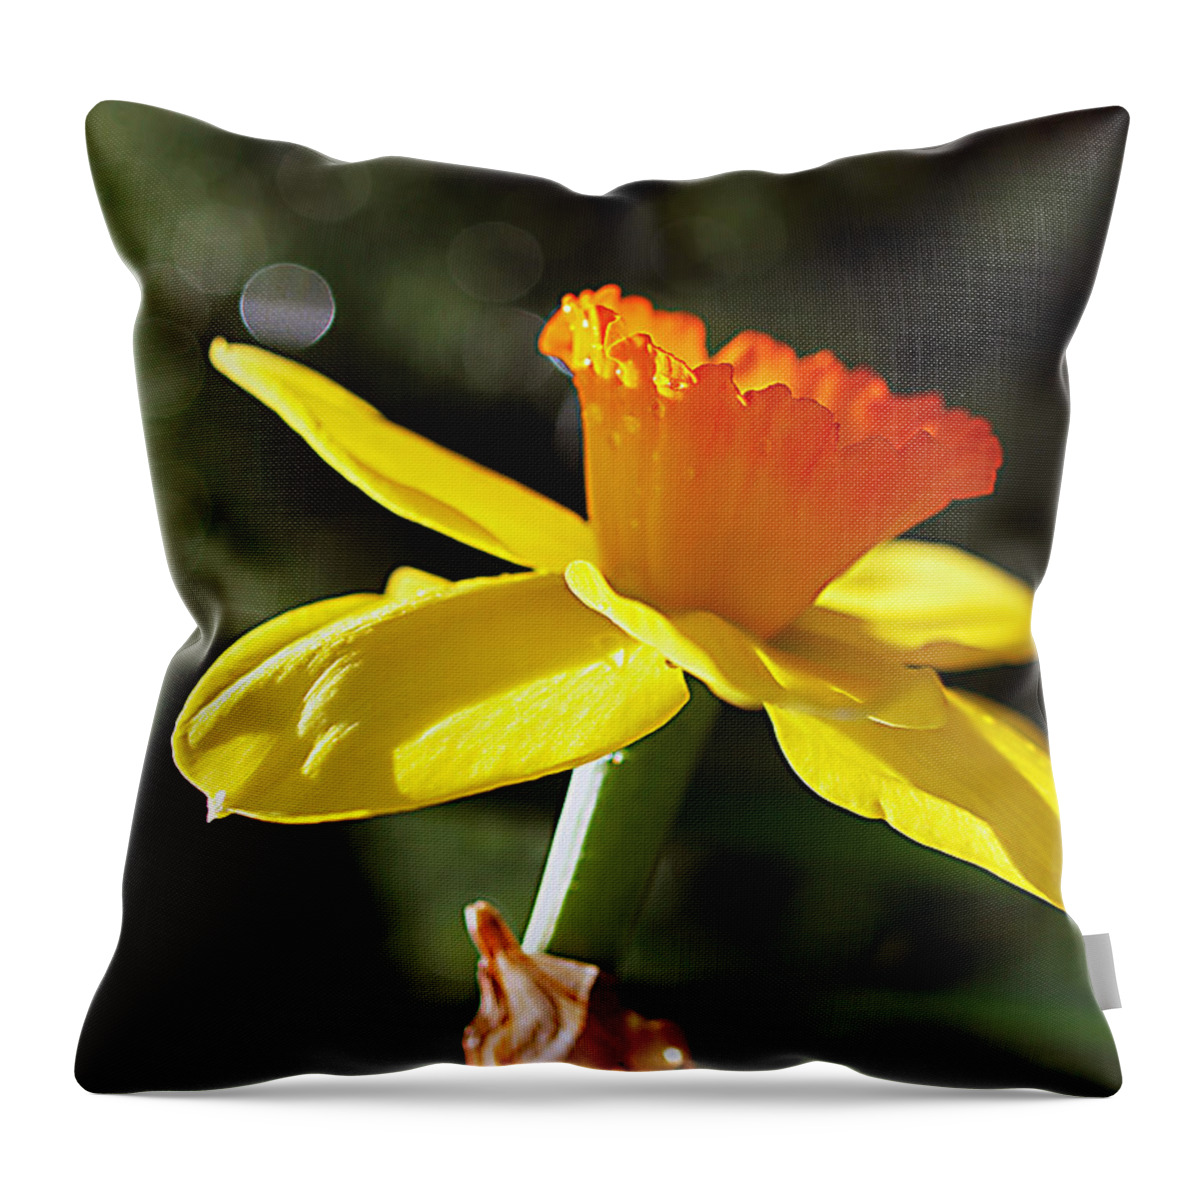 Daffodil Throw Pillow featuring the photograph Wide Open by Joe Schofield